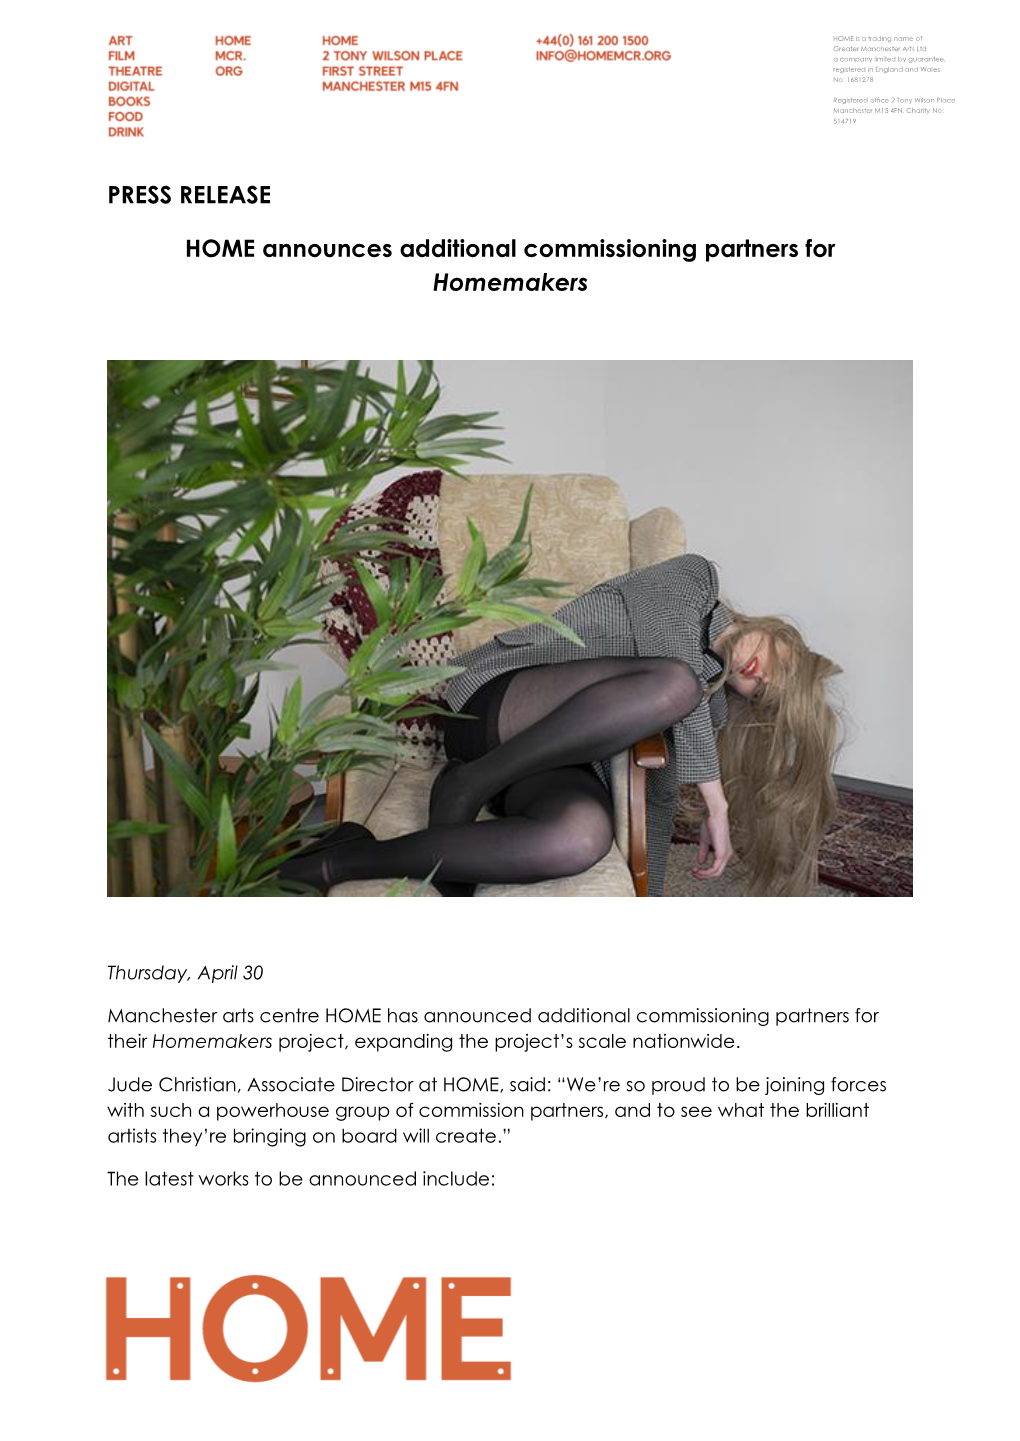 PRESS RELEASE HOME Announces Additional Commissioning Partners